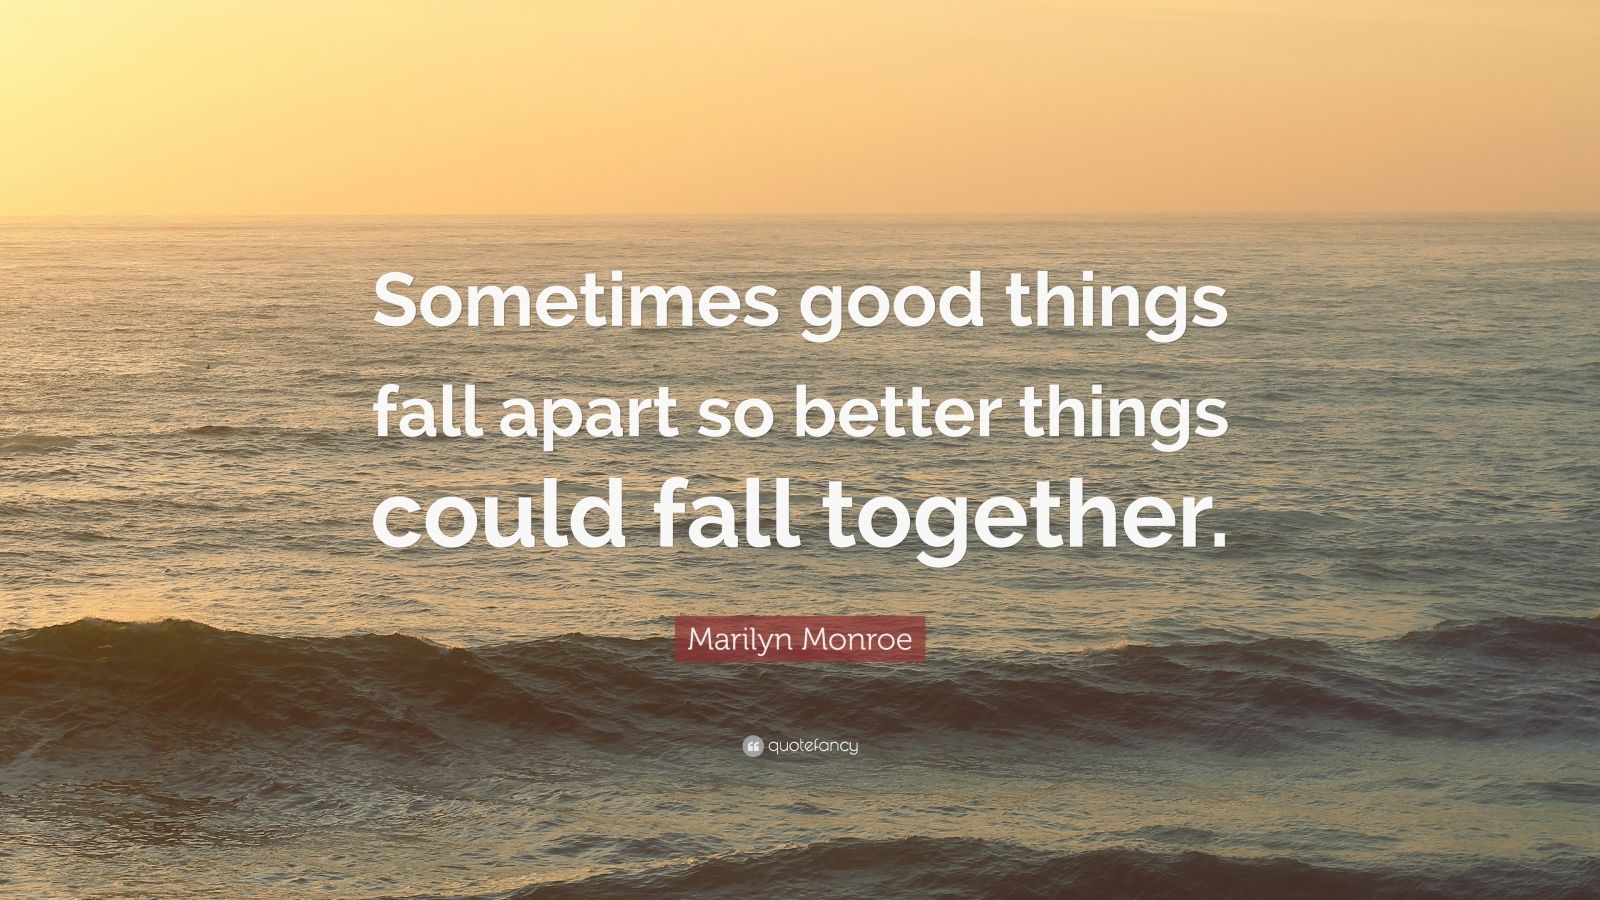 Marilyn Monroe Quote: “Sometimes good things fall apart so better